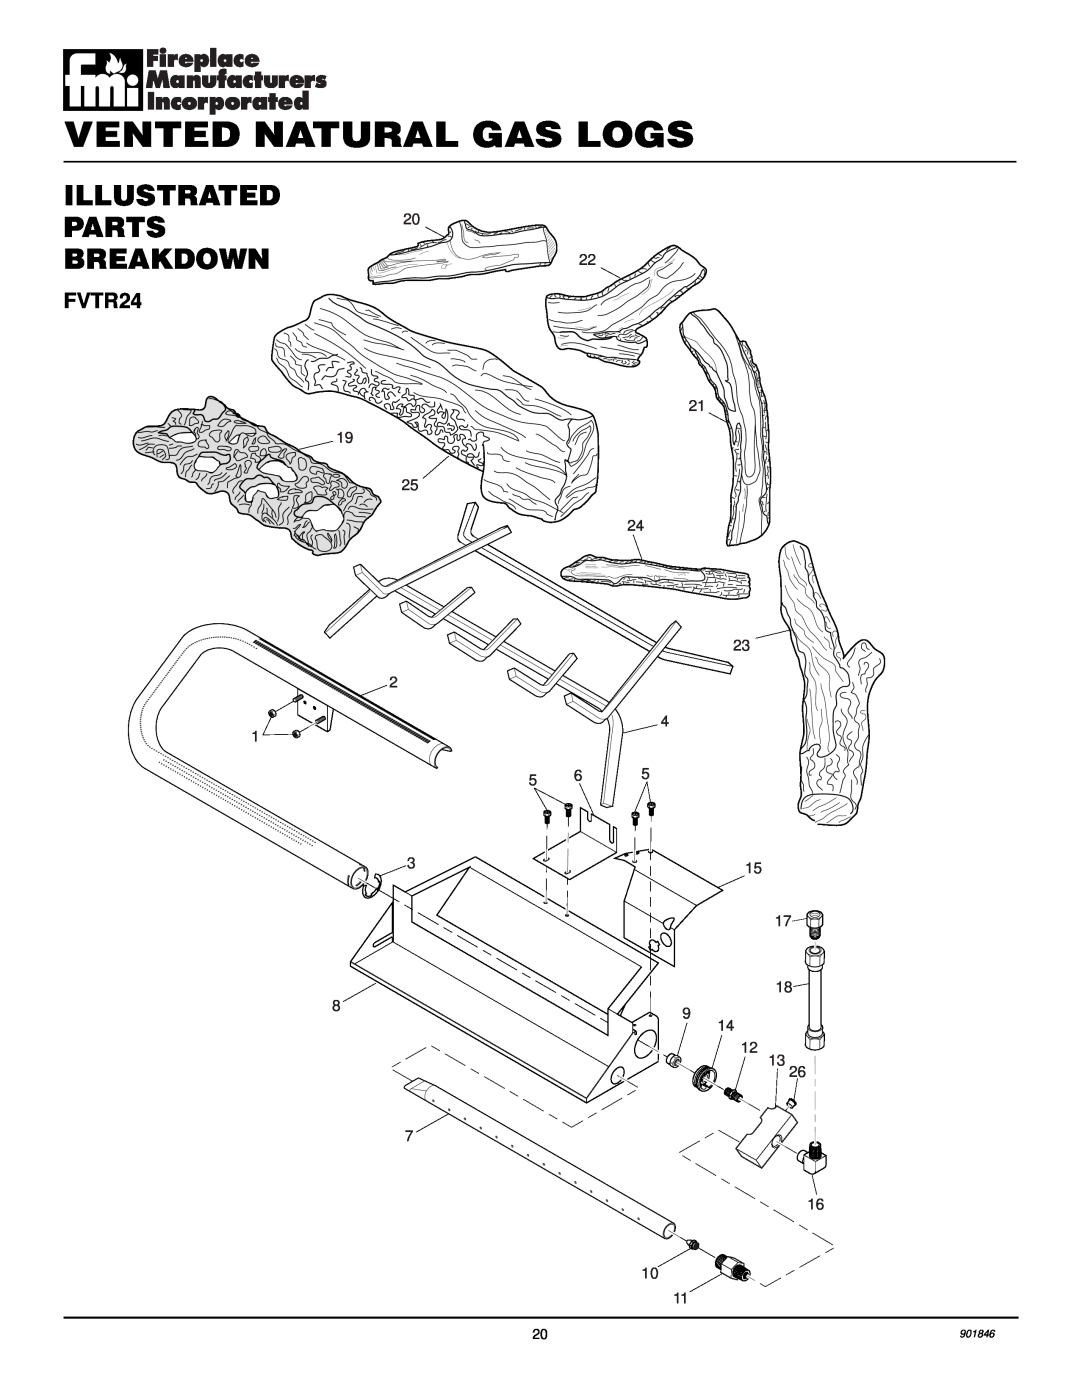 FMI FVTR18 installation manual ILLUSTRATED PARTS20 BREAKDOWN, Vented Natural Gas Logs, FVTR24, 901846 